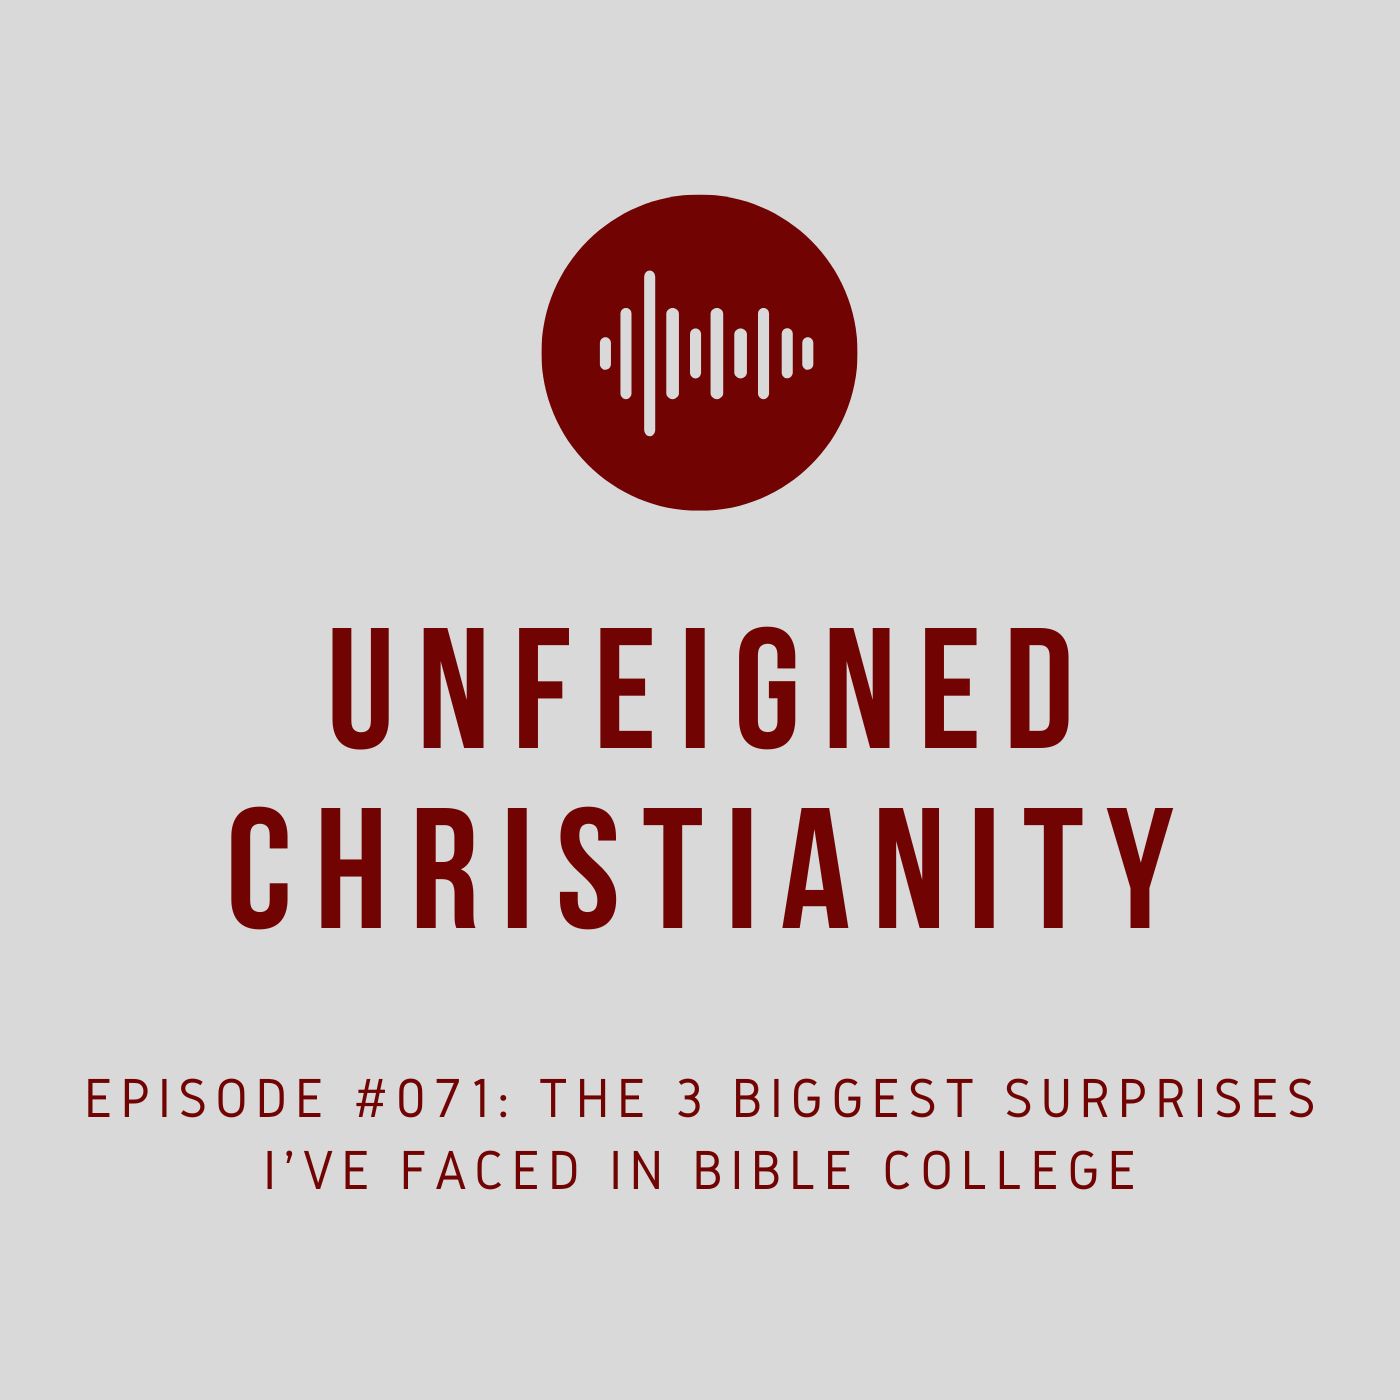 #071 - The 3 Biggest Surprises I've Faced in Bible College